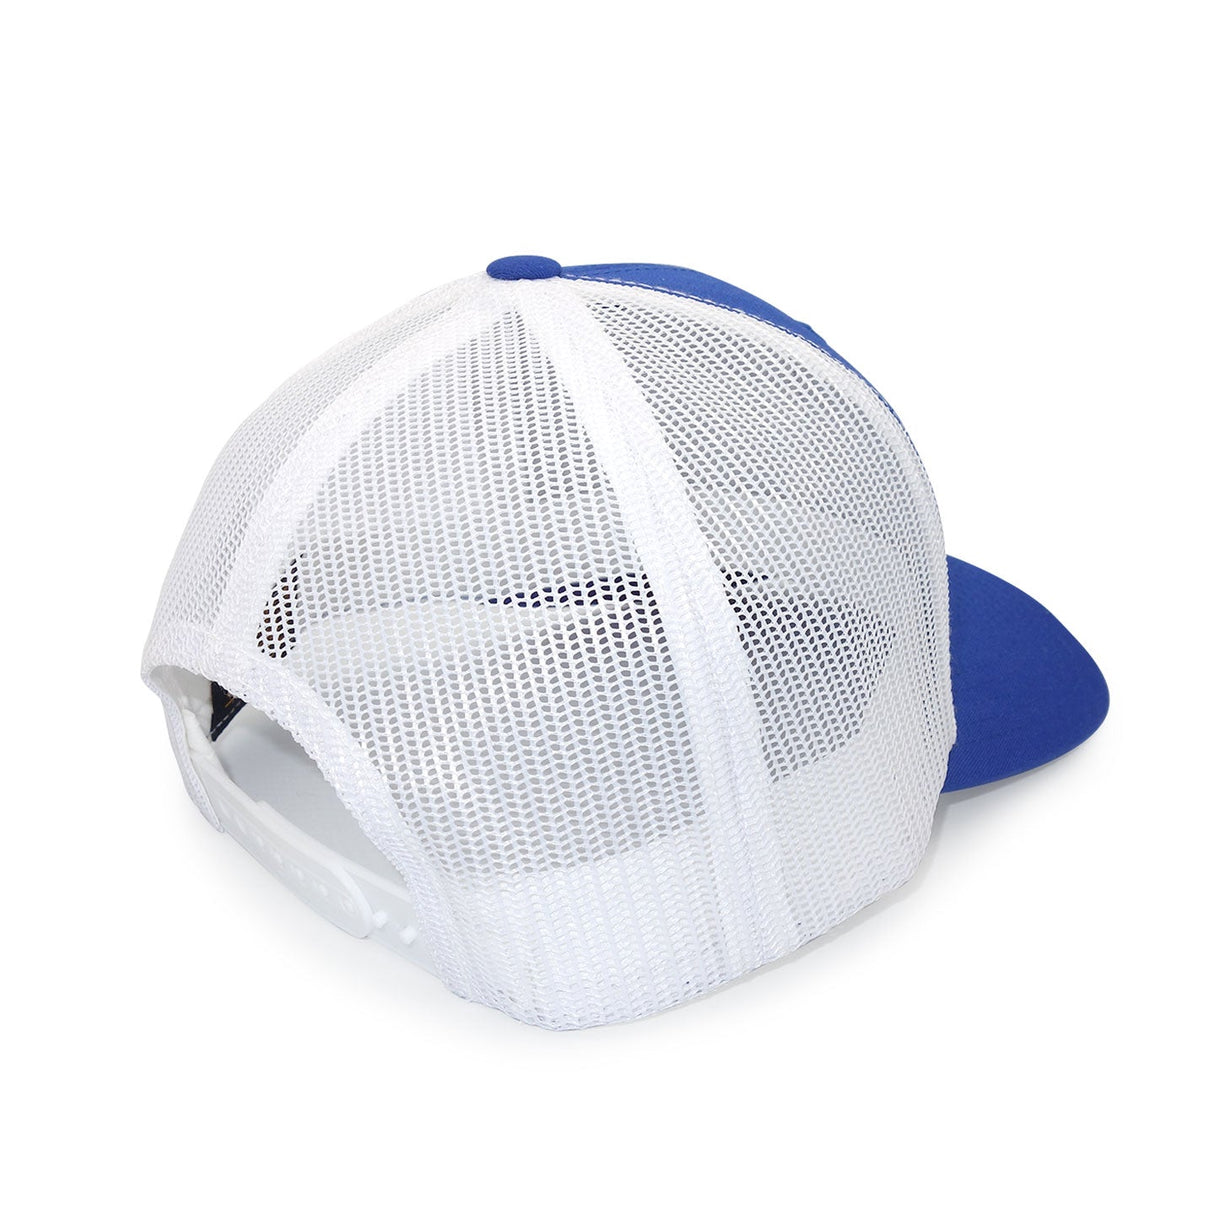 Authentic Outsider Royal Blue and White Trucker Cap